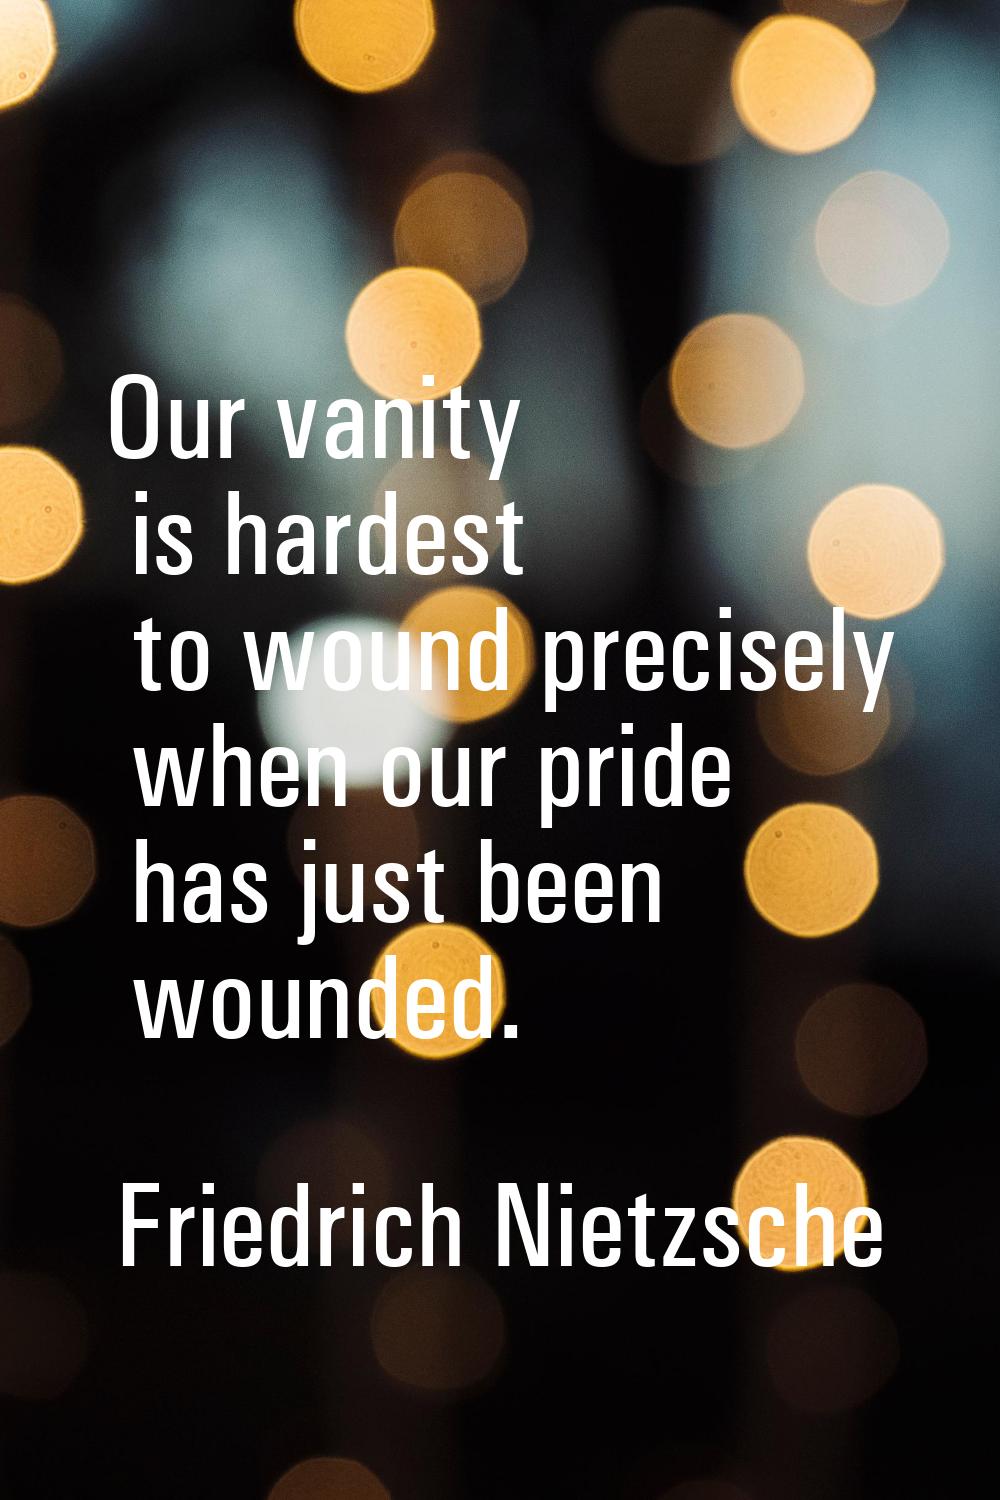 Our vanity is hardest to wound precisely when our pride has just been wounded.